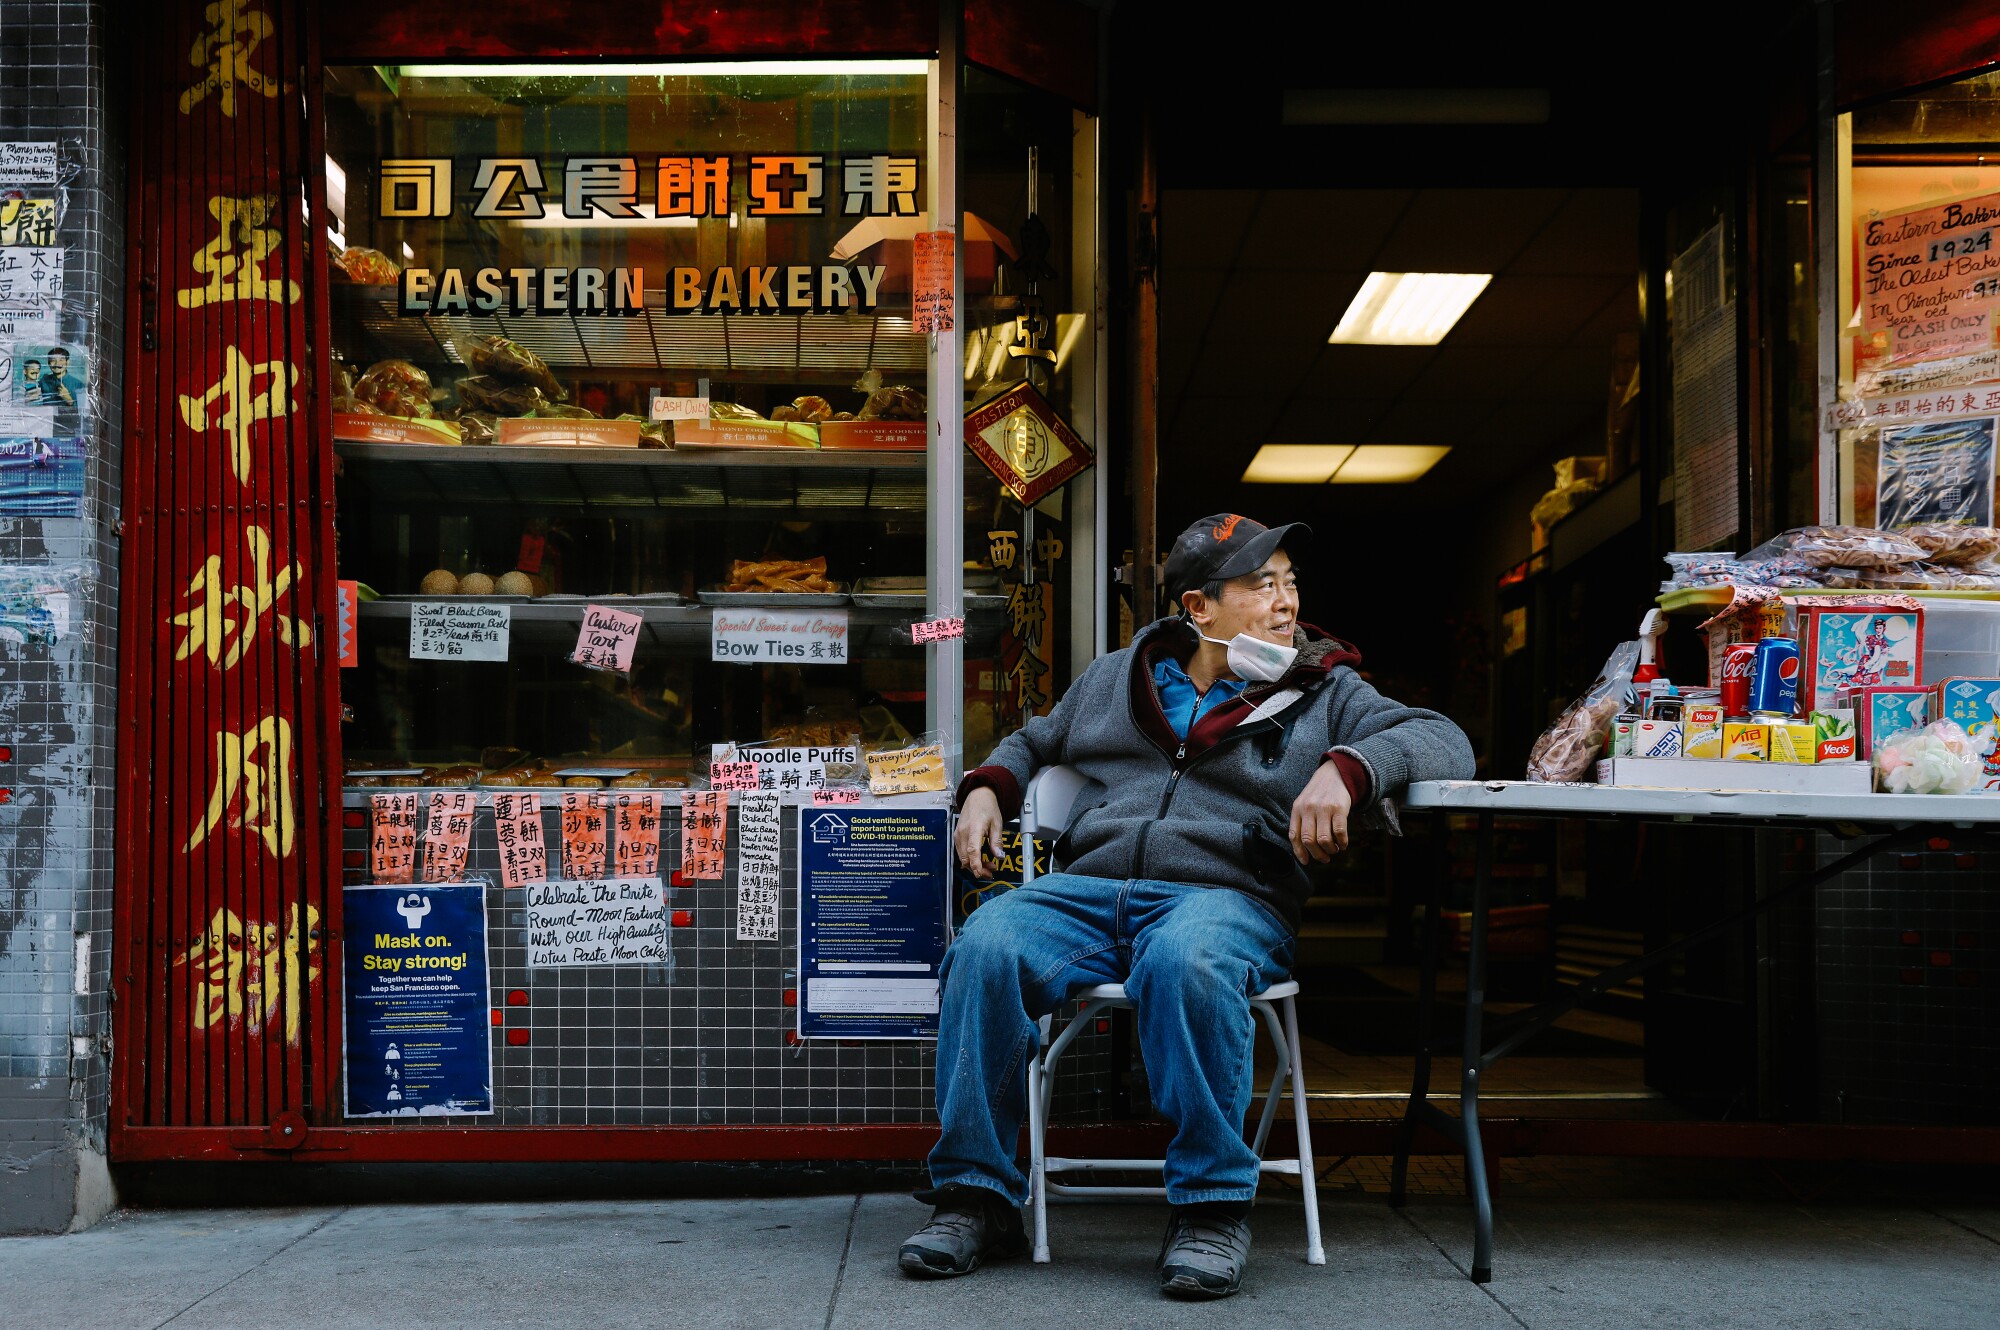 A man sits at a folding table in front of a bakery.